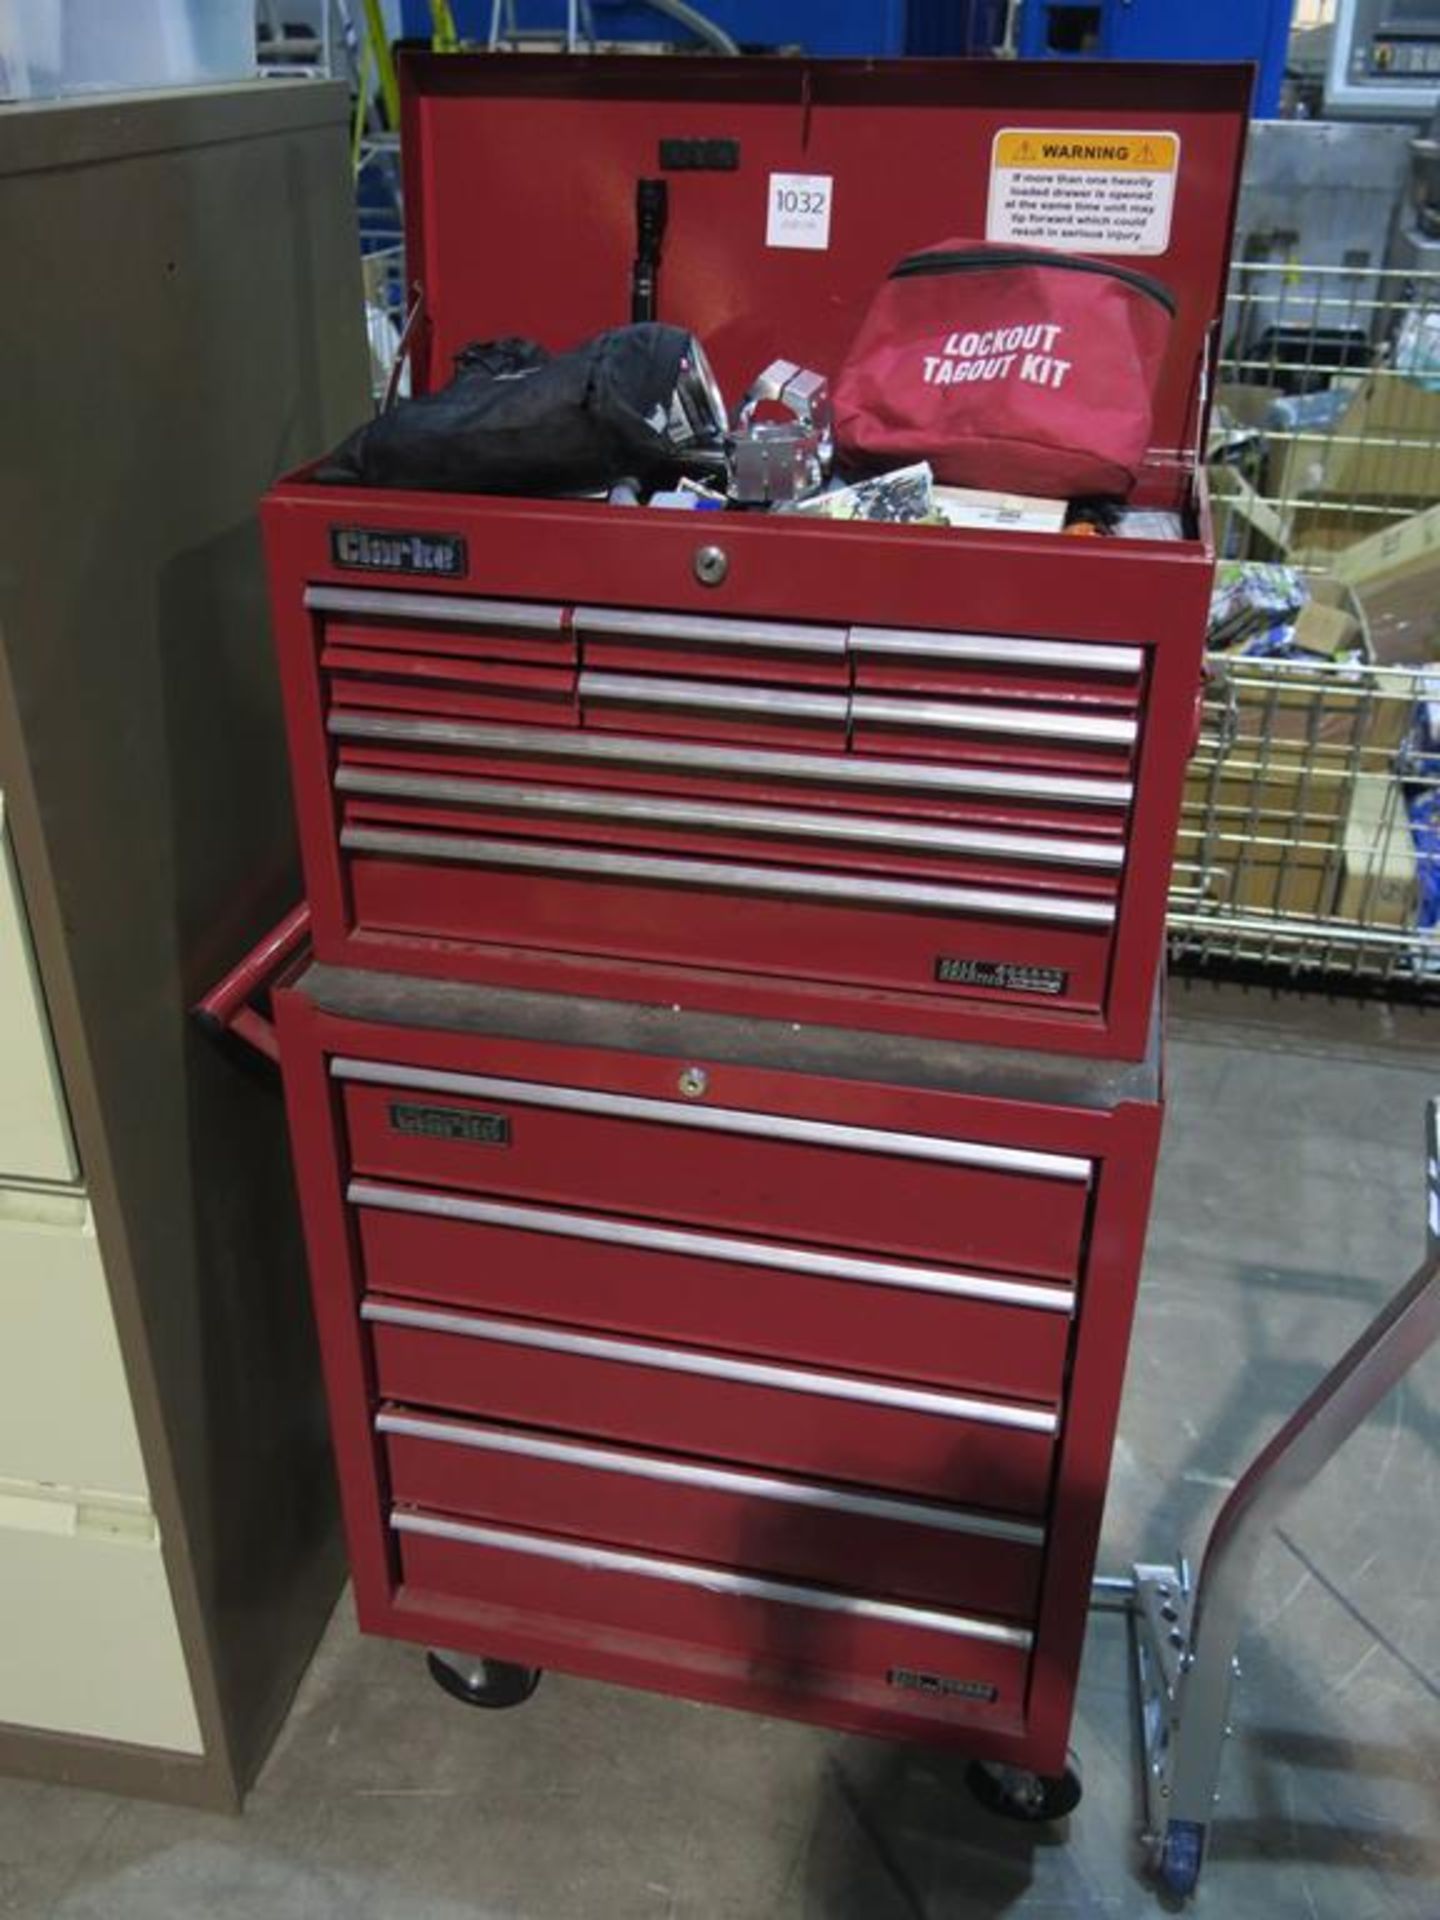 * Clark Top And Bottom Tool Boxes comes with Contents